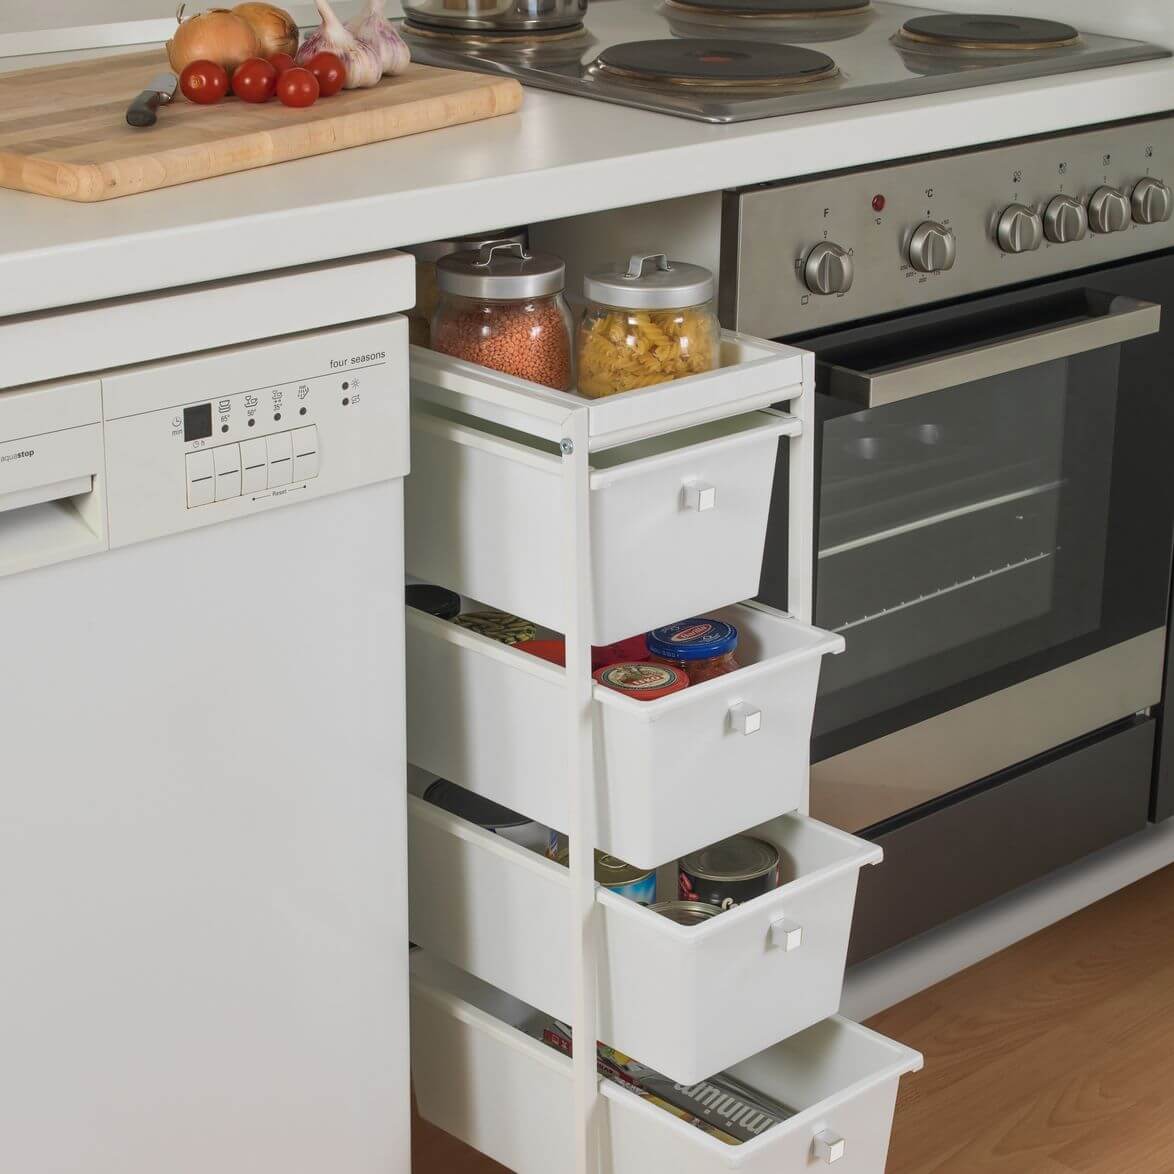 A slim white storage trolley with four drawers next to a dishwasher in the kitchen